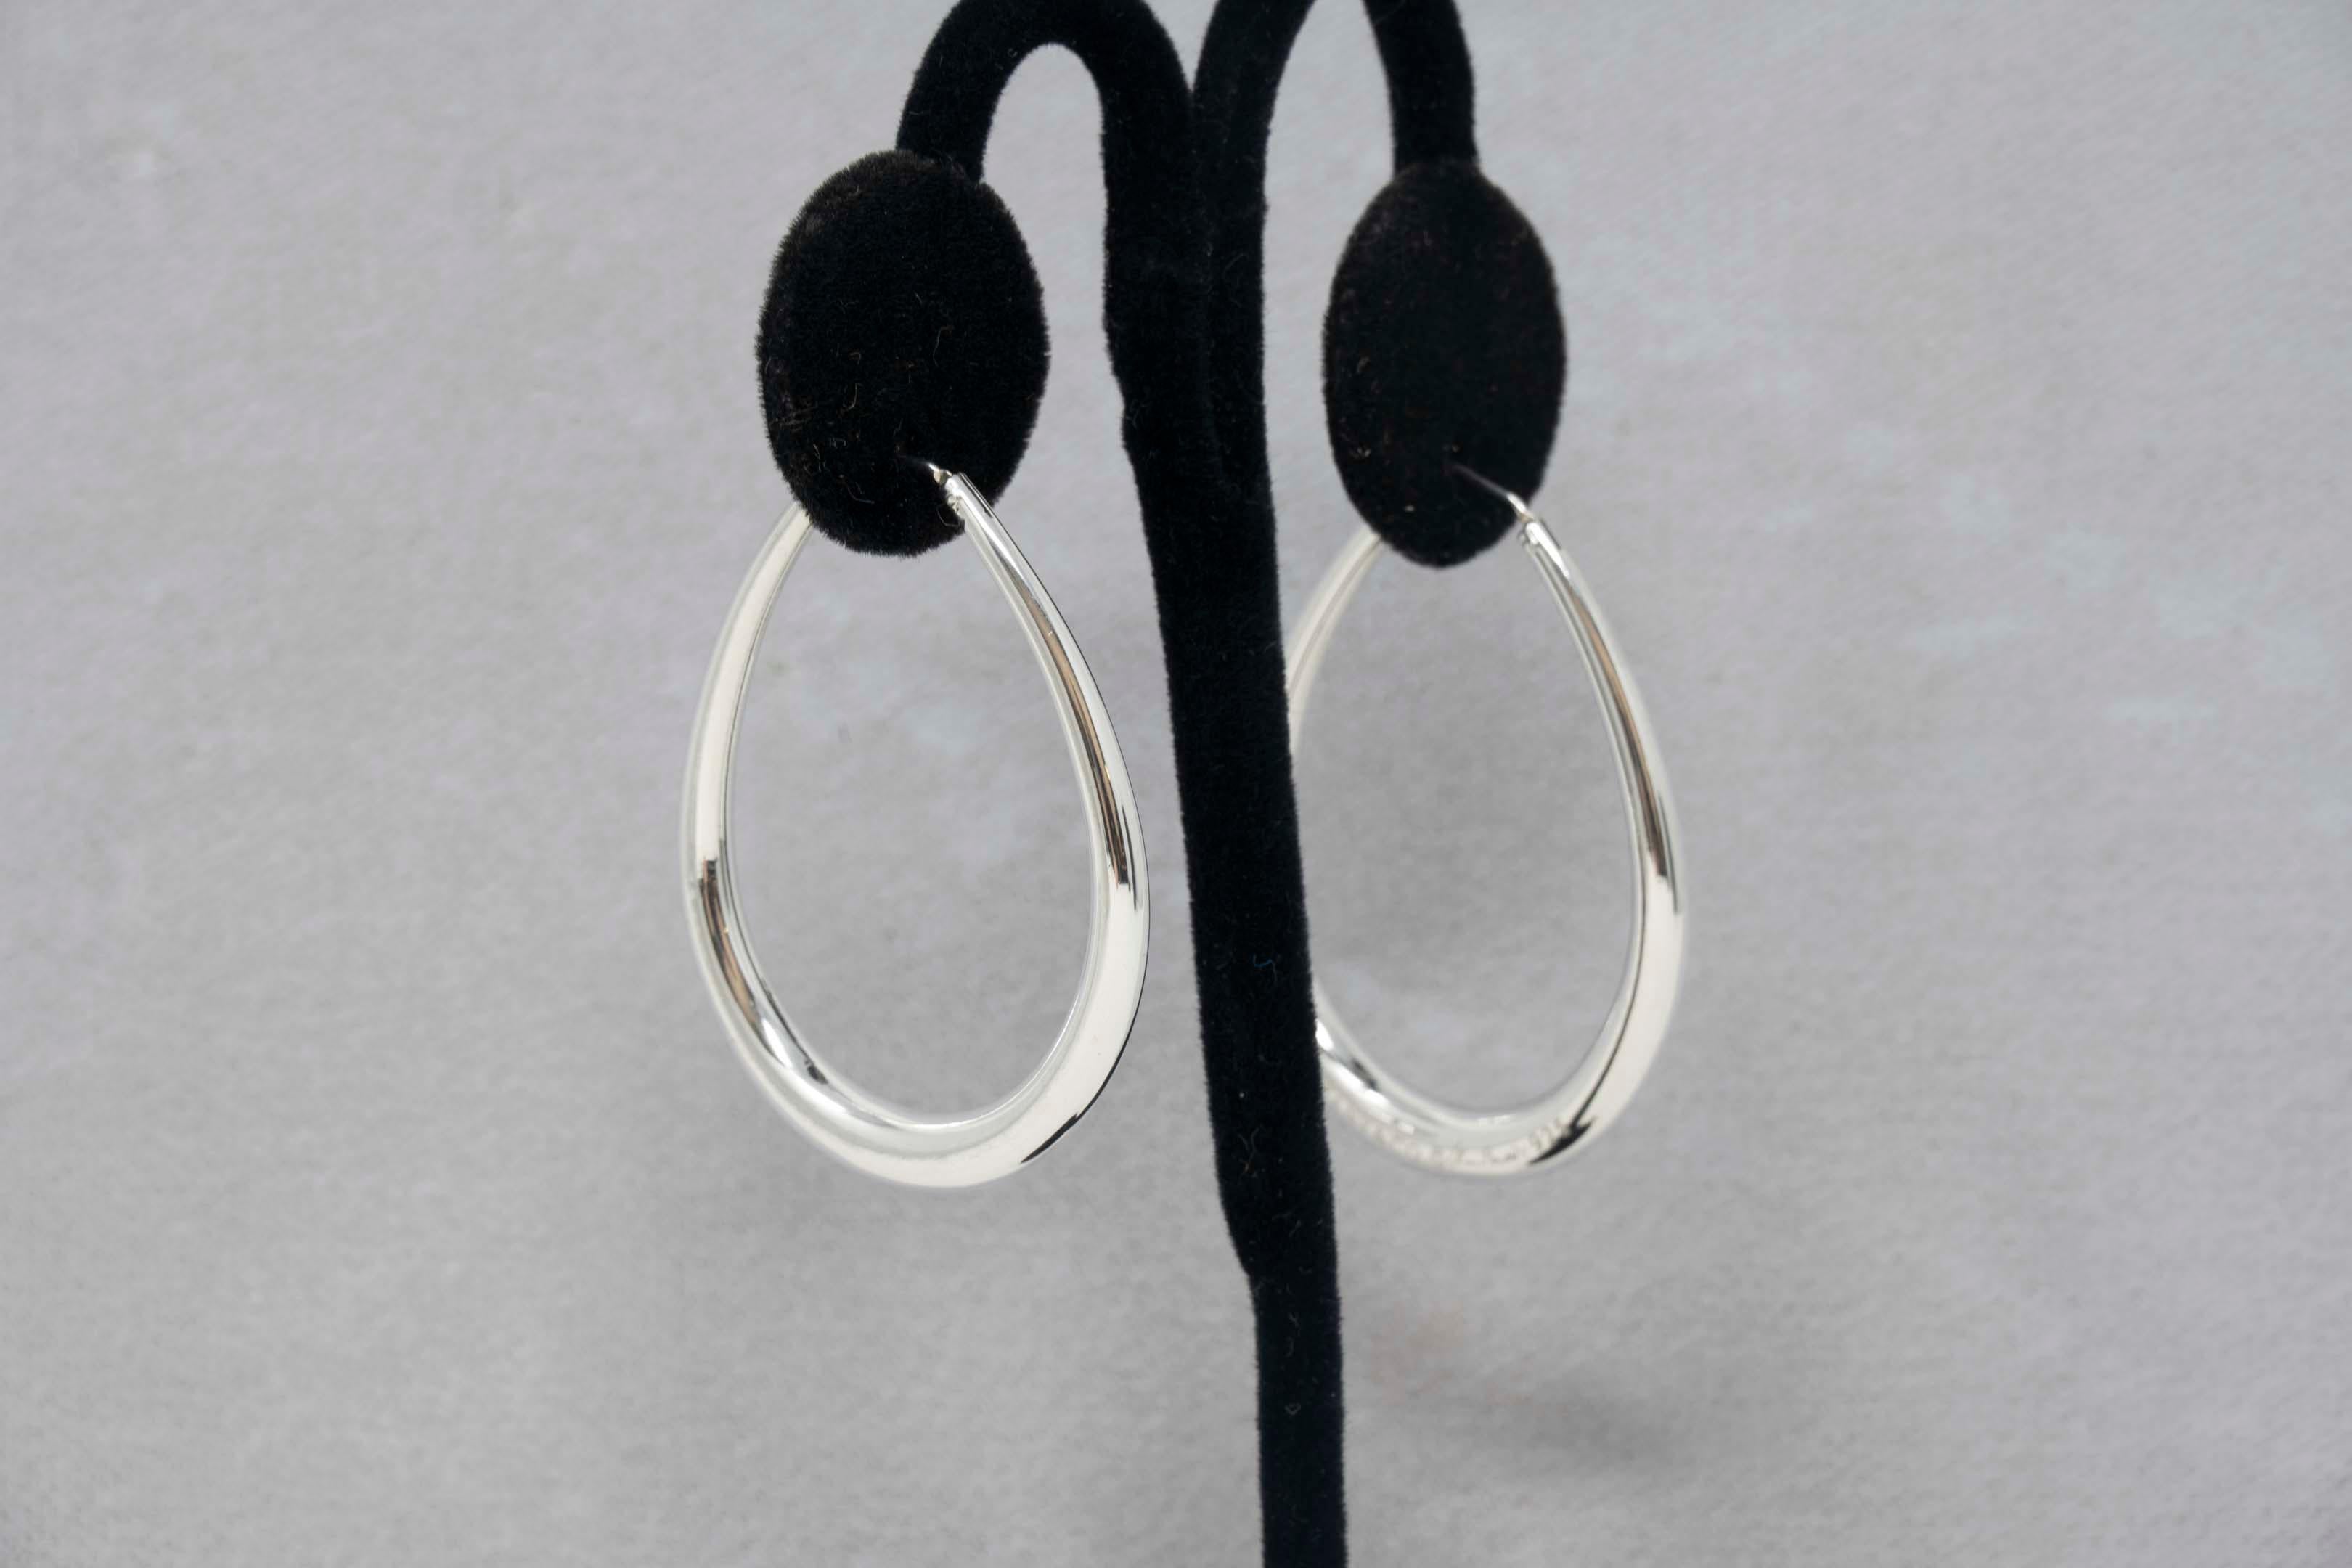 Tiffany & Co 925 silver hoop earrings, signed by Elsa Peretti with snap closure. Made USA, style modern late 20th century. In good condition.
